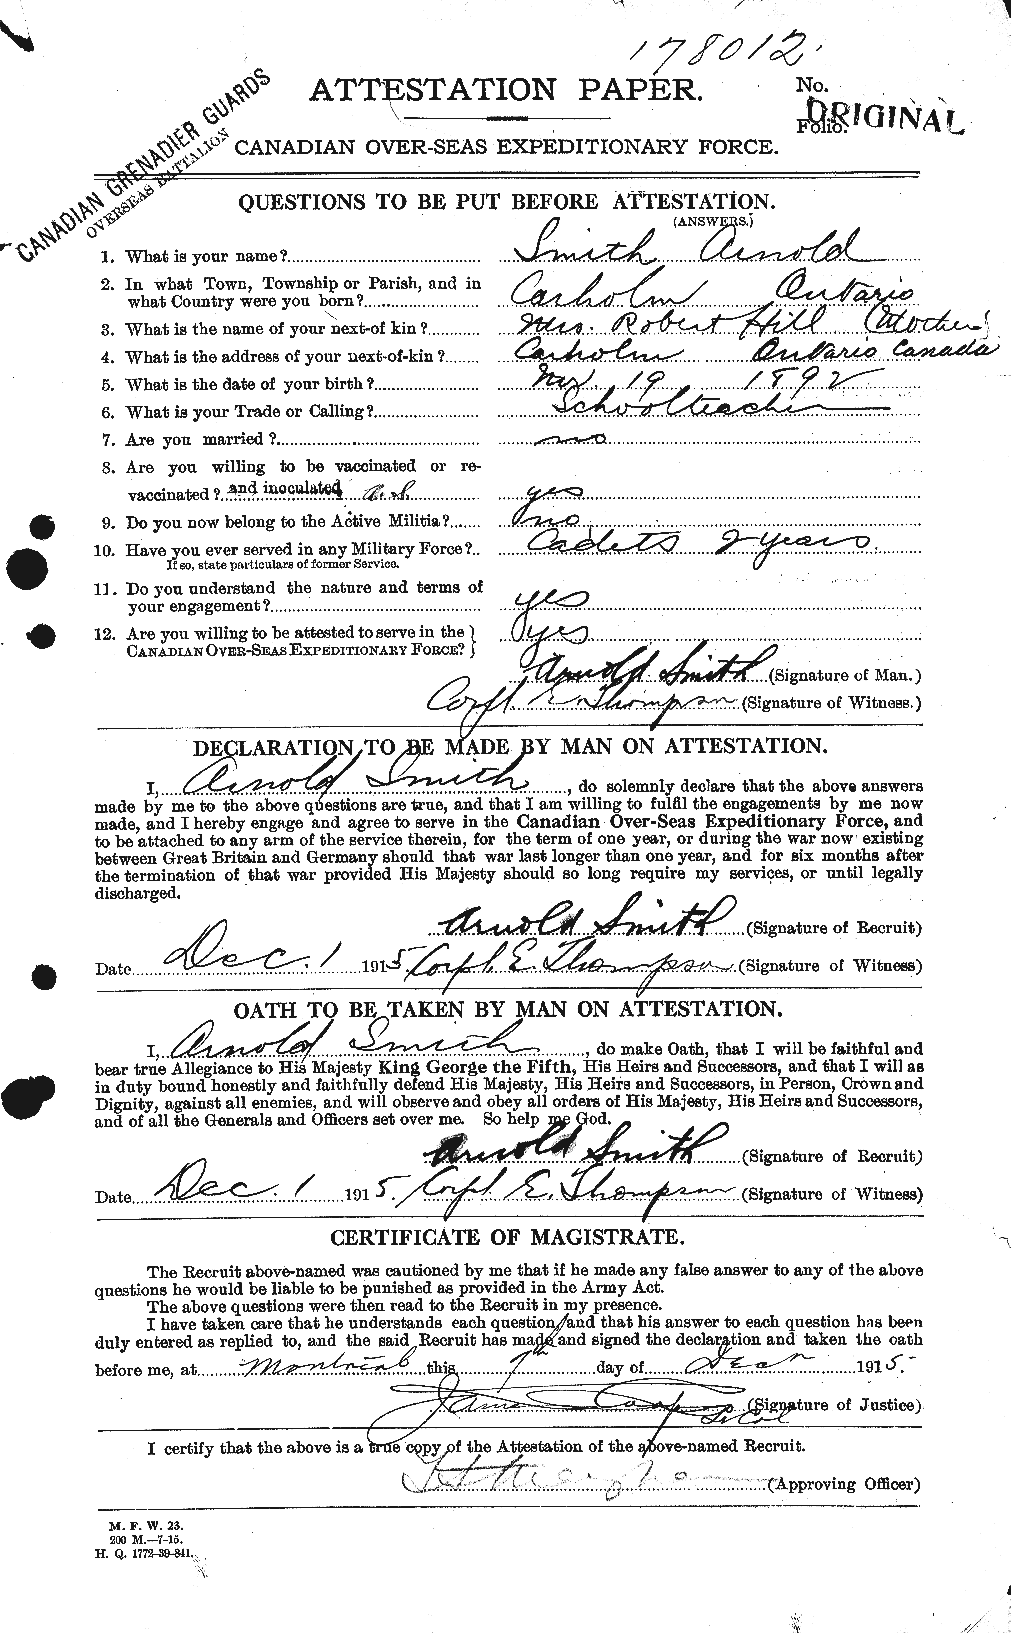 Personnel Records of the First World War - CEF 102196a